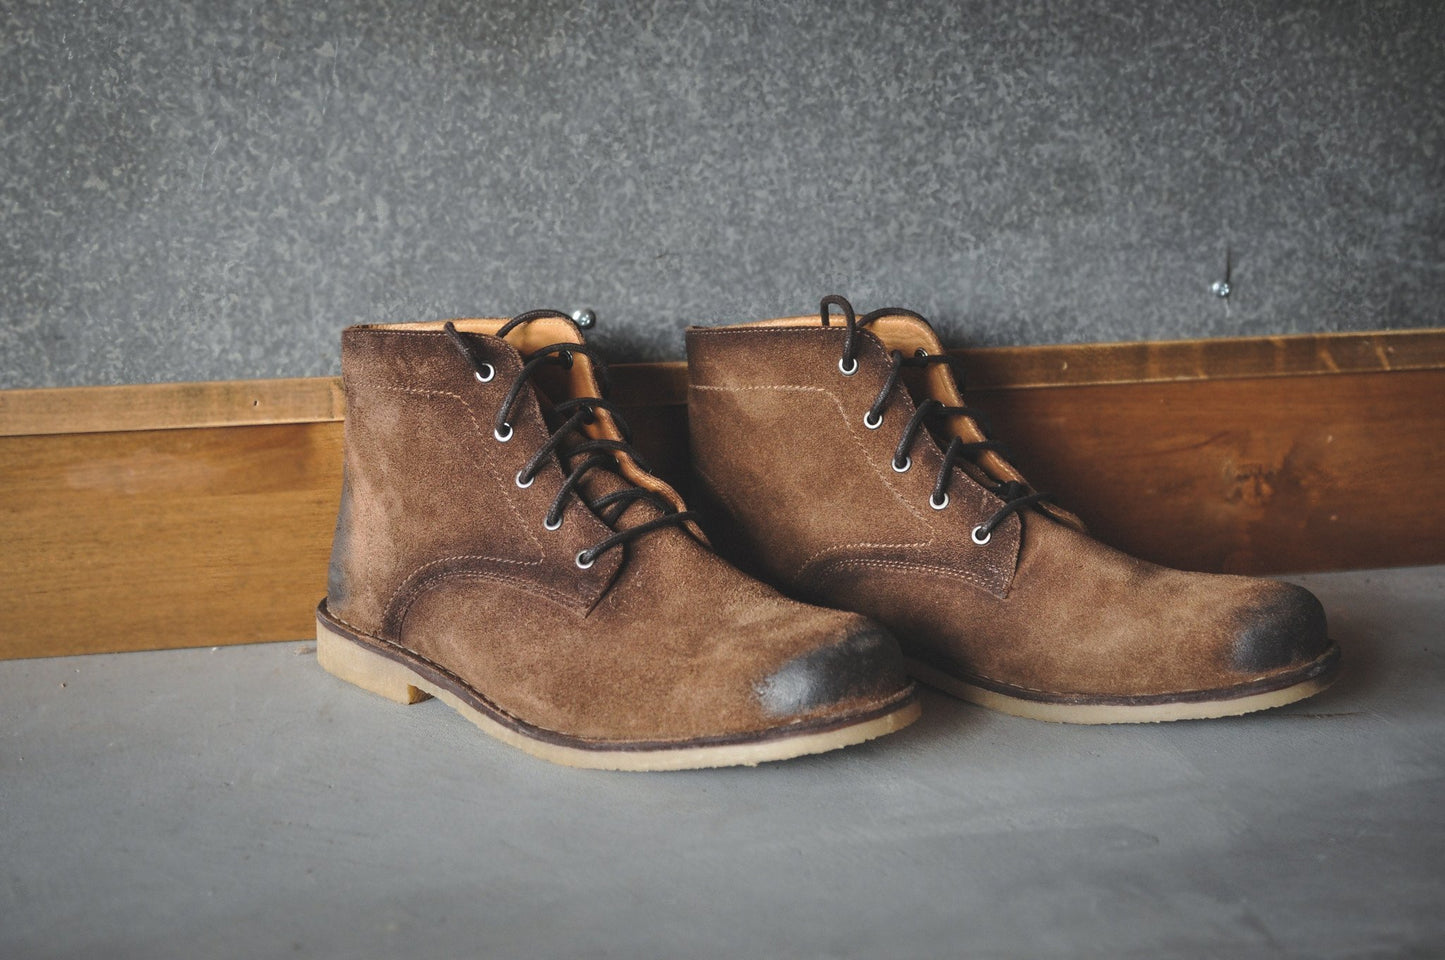 Hound & Hammer The Grover | Men's Burnished Tobacco Suede Ankle Boots - Men - Footwear - Boots - Ankle Boots - Benn~Burry